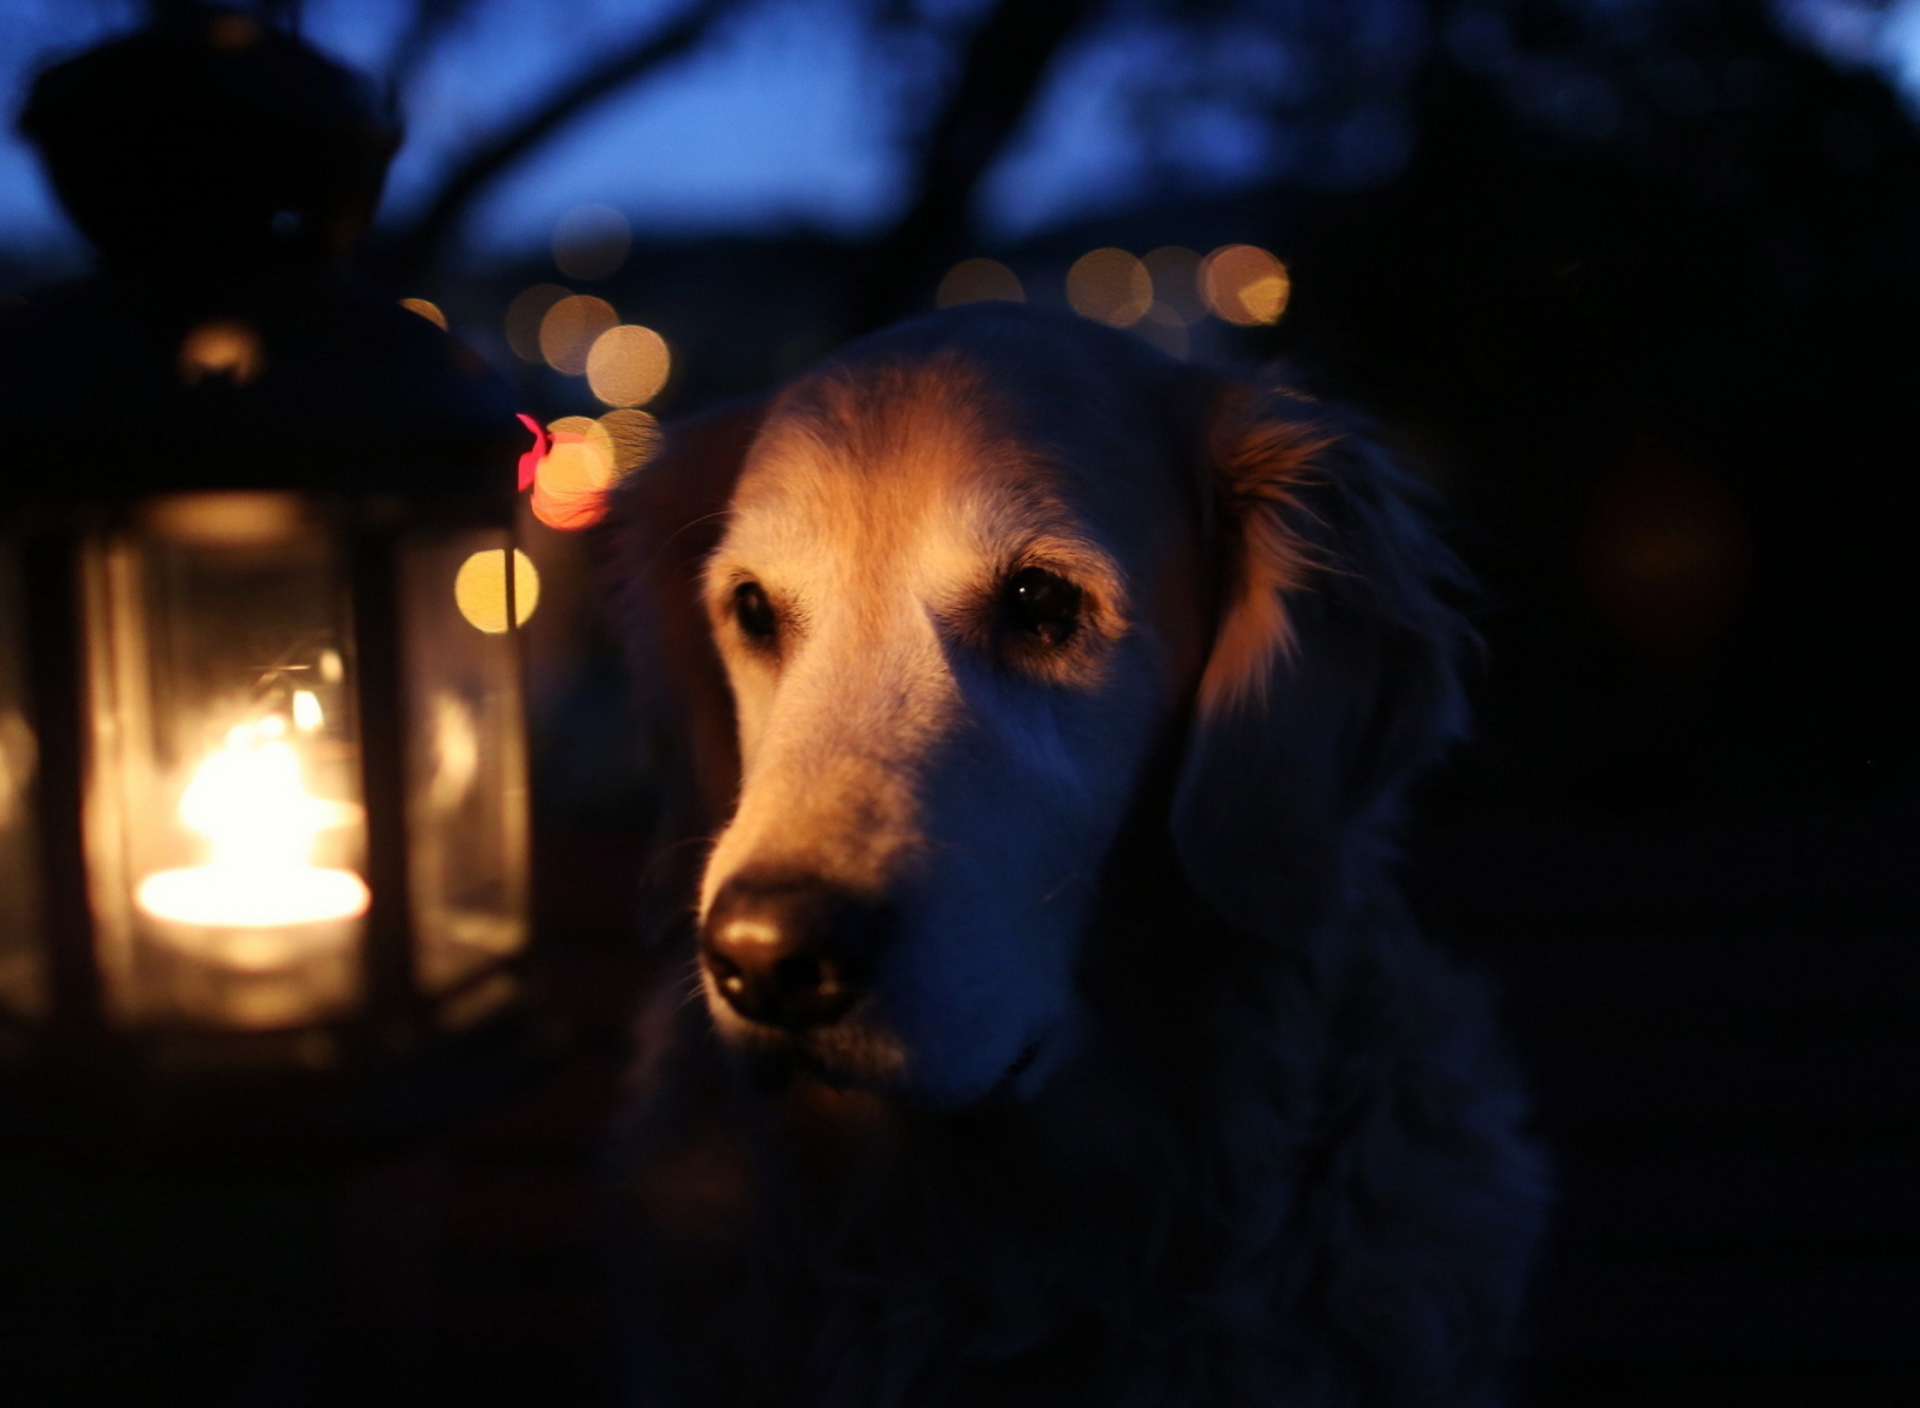 Das Ginger Dog In Candle Light Wallpaper 1920x1408